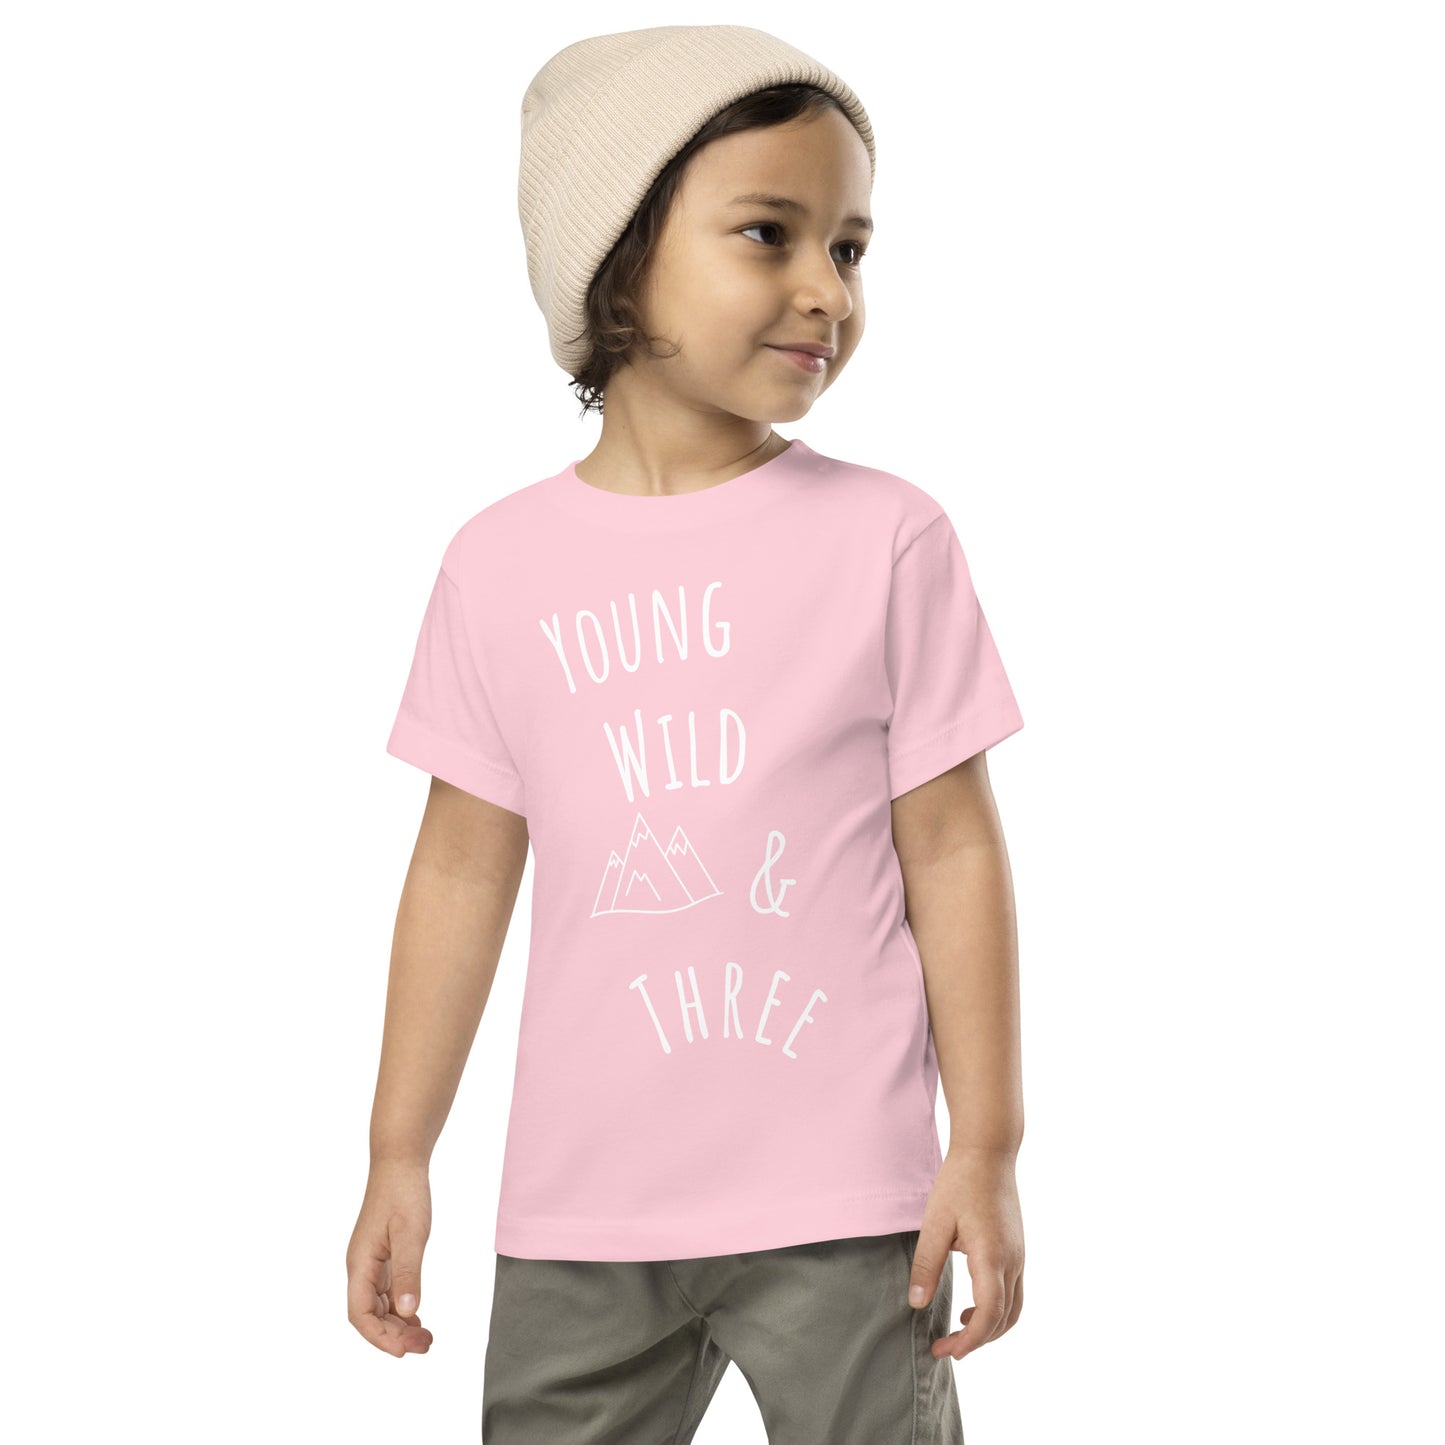 Toddler Short Sleeve Tee - Young, wild and three B/W